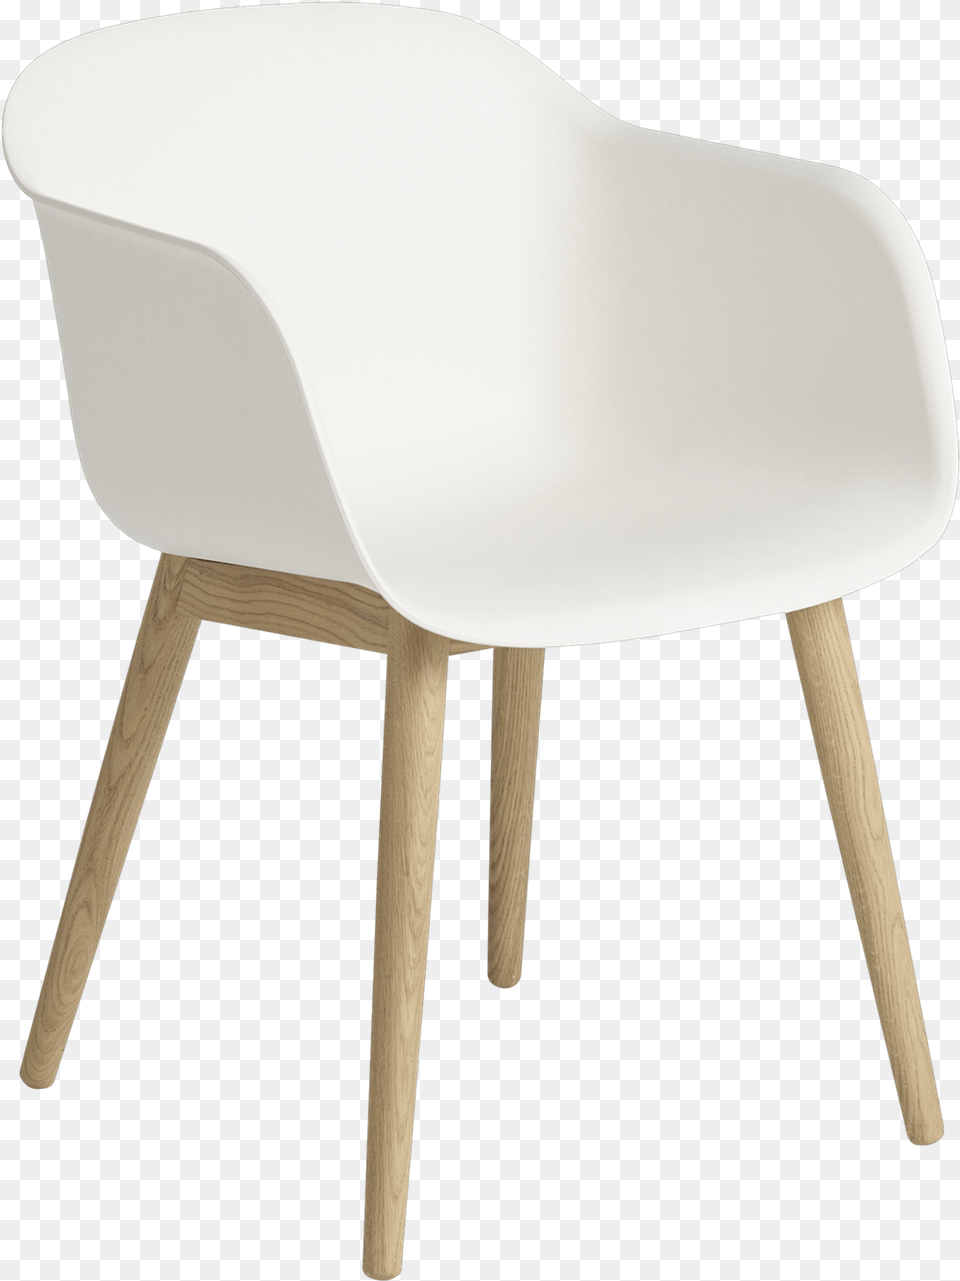 The Fiber Armchair39s Wood Base Creates A Sturdy And Muuto Fiber Armchair Wood Base Whiteoak, Furniture, Plywood, Chair Png Image